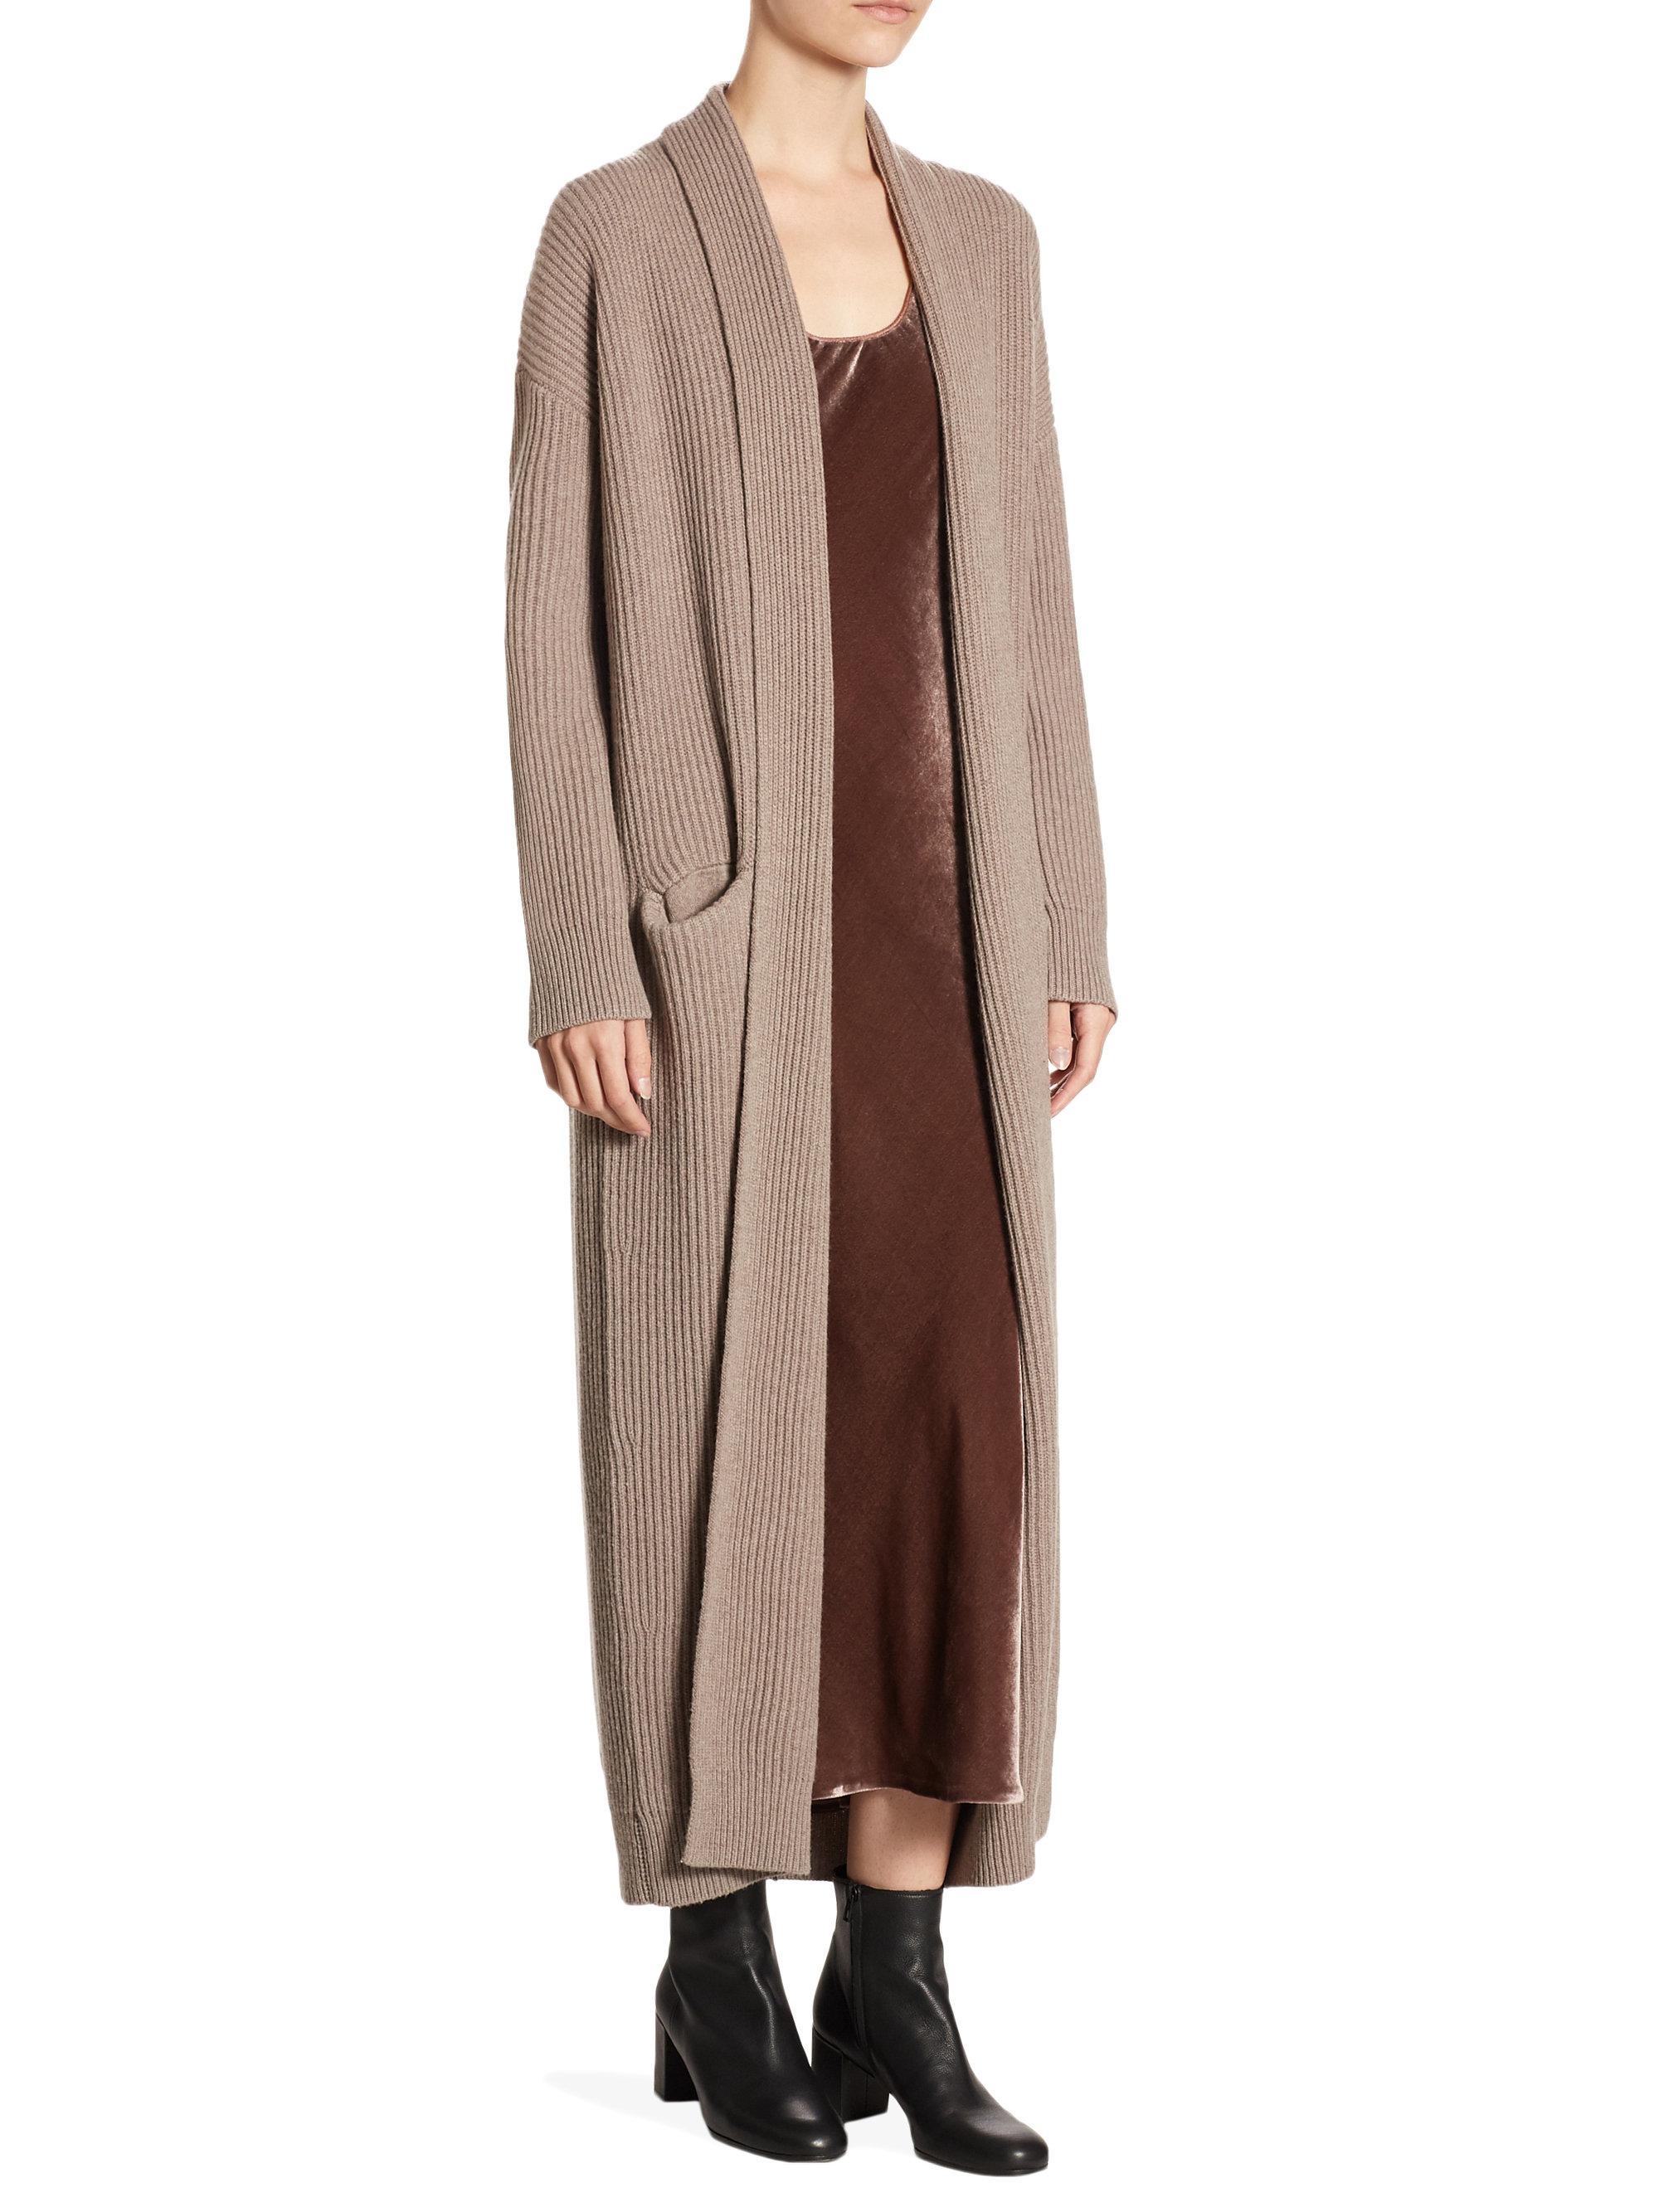 Lyst - Vince Open Front Sweater Robe in Brown